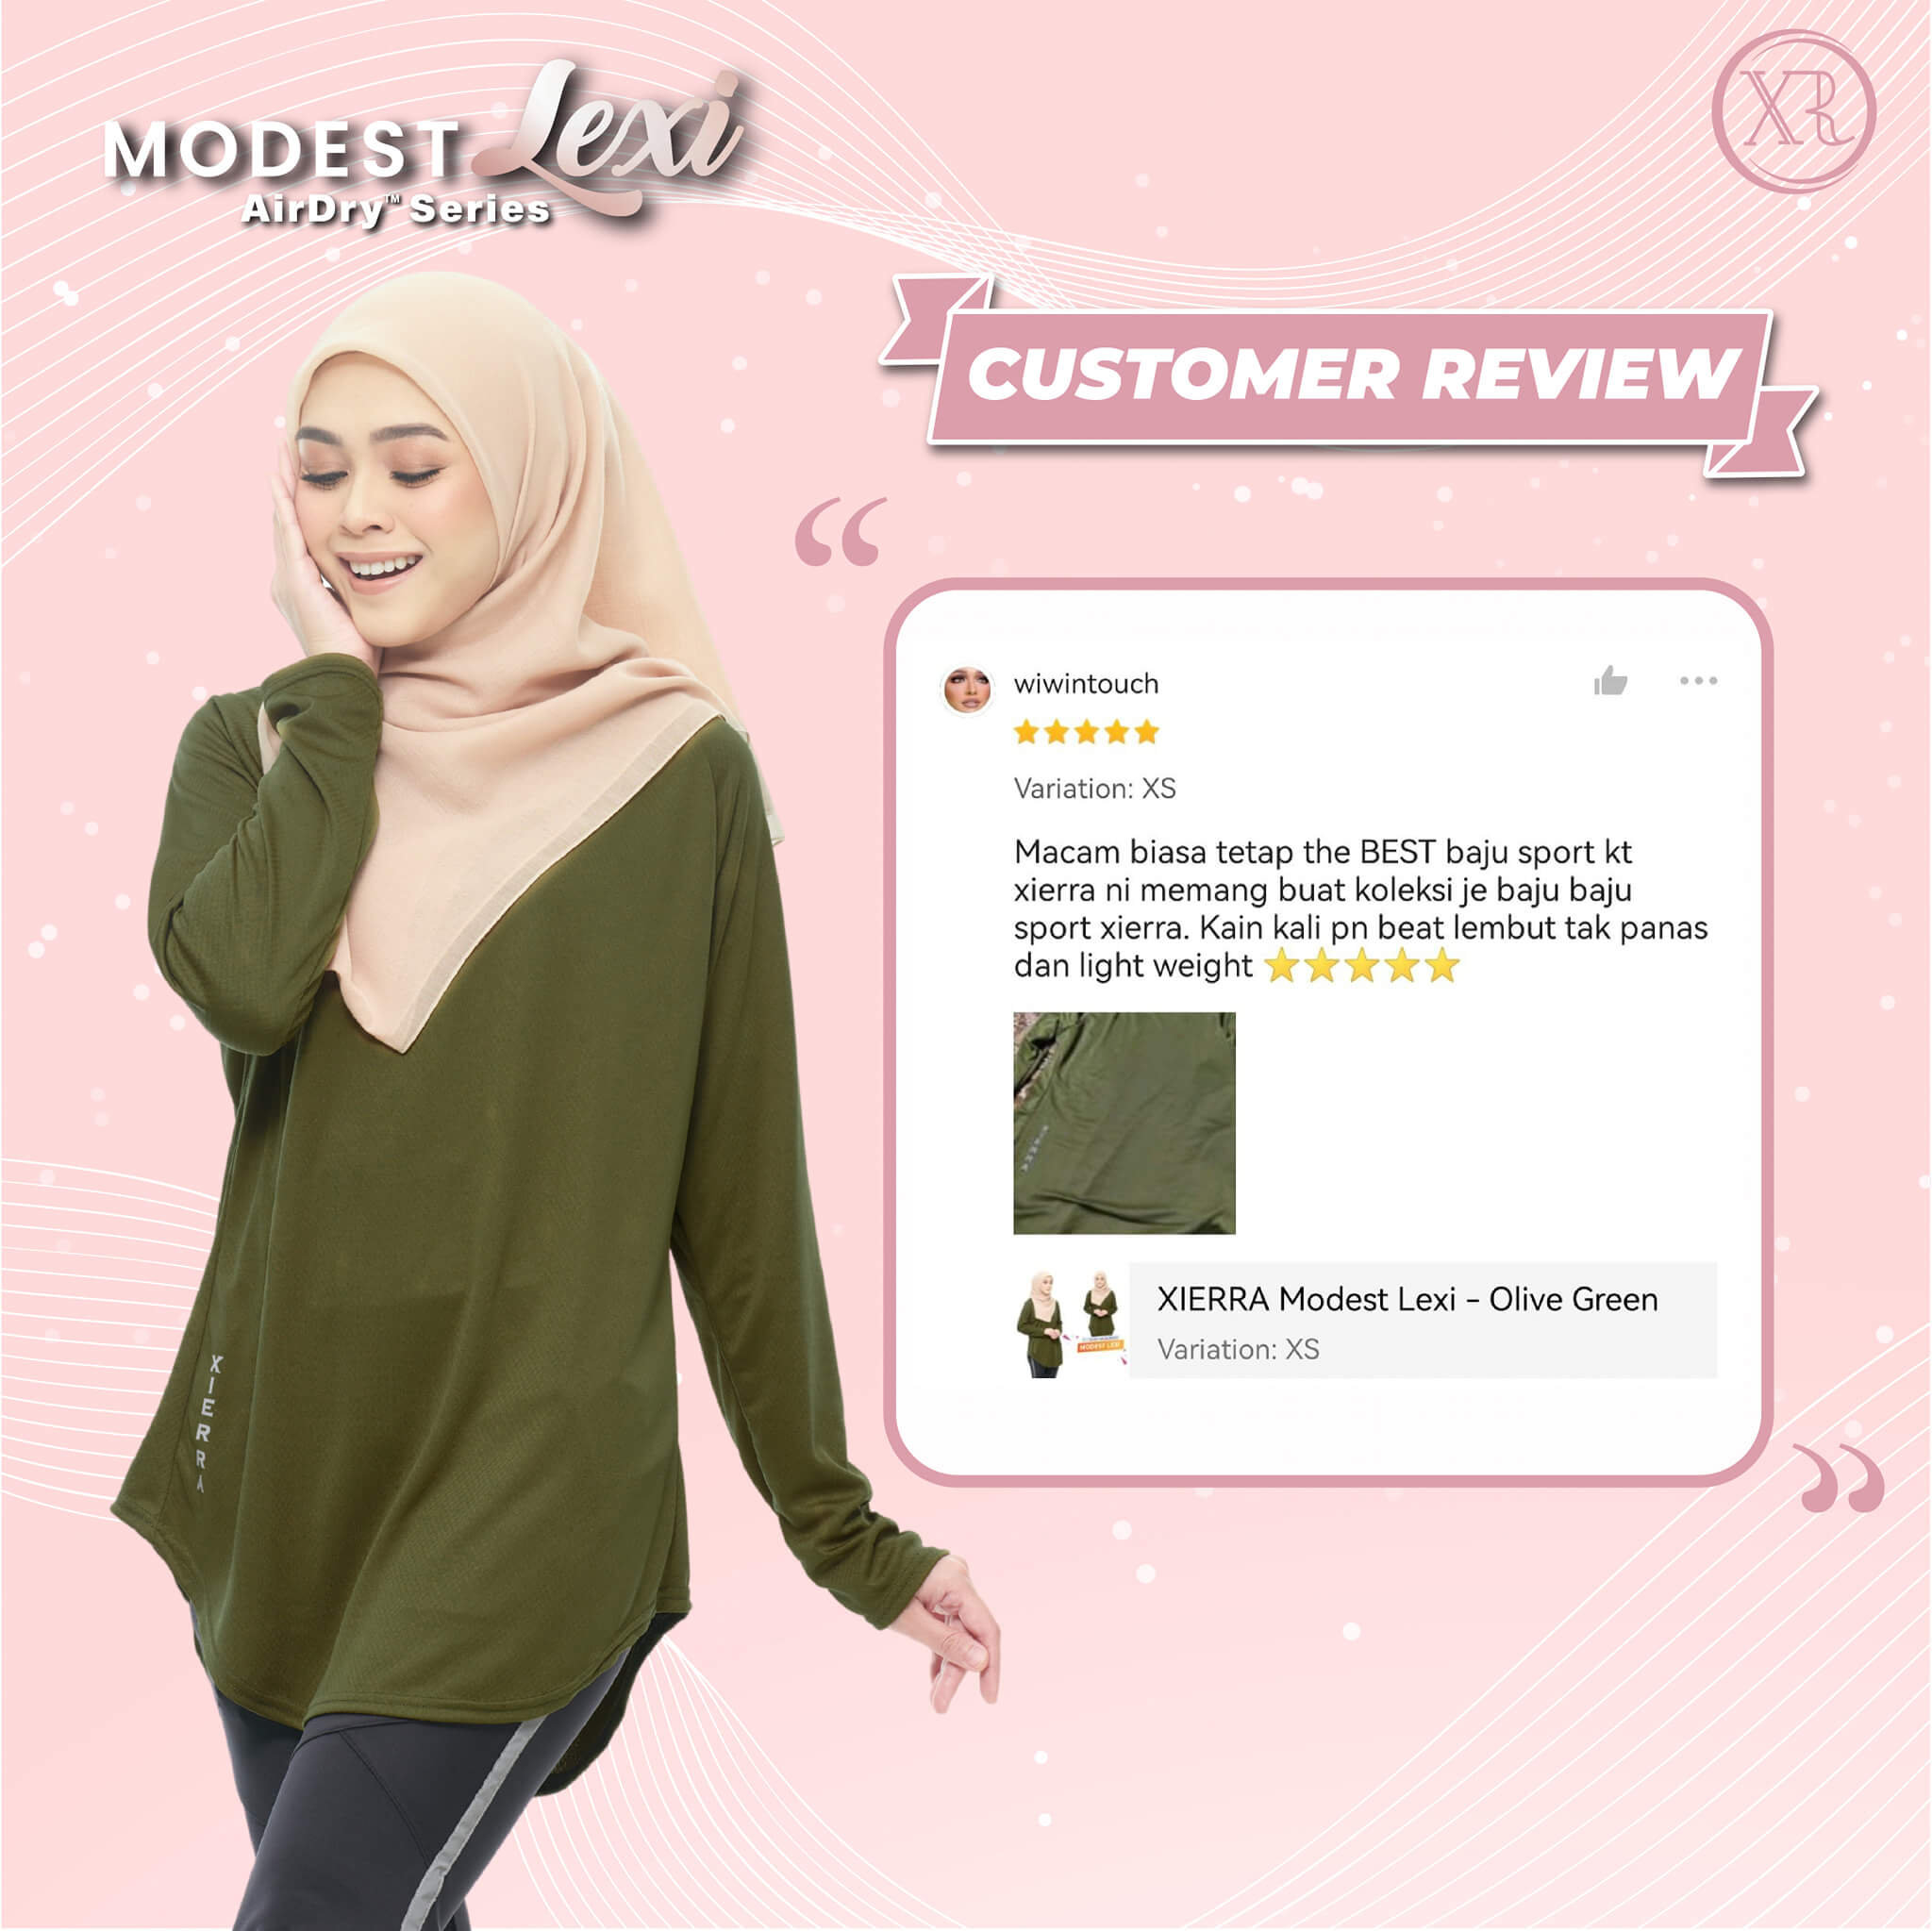 A woman smiling, wearing cream colored hijab, green top and black pants with a customer review's displayed next to her.